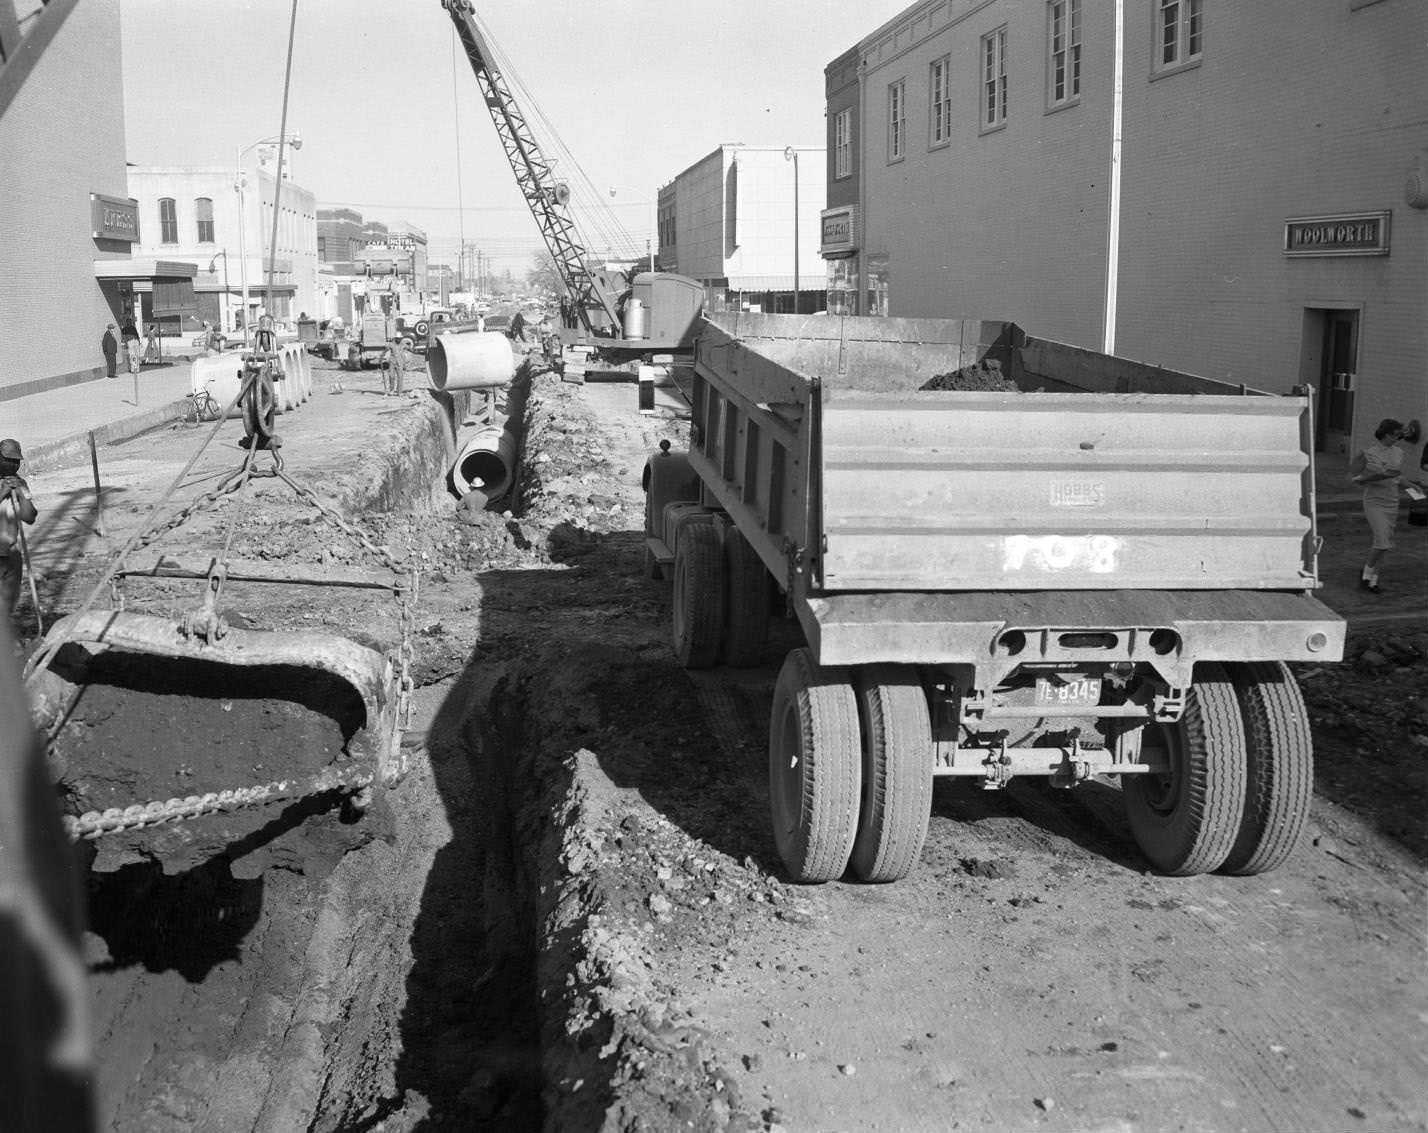 Laying Storm Sewers in Downtown Abilene, 1959